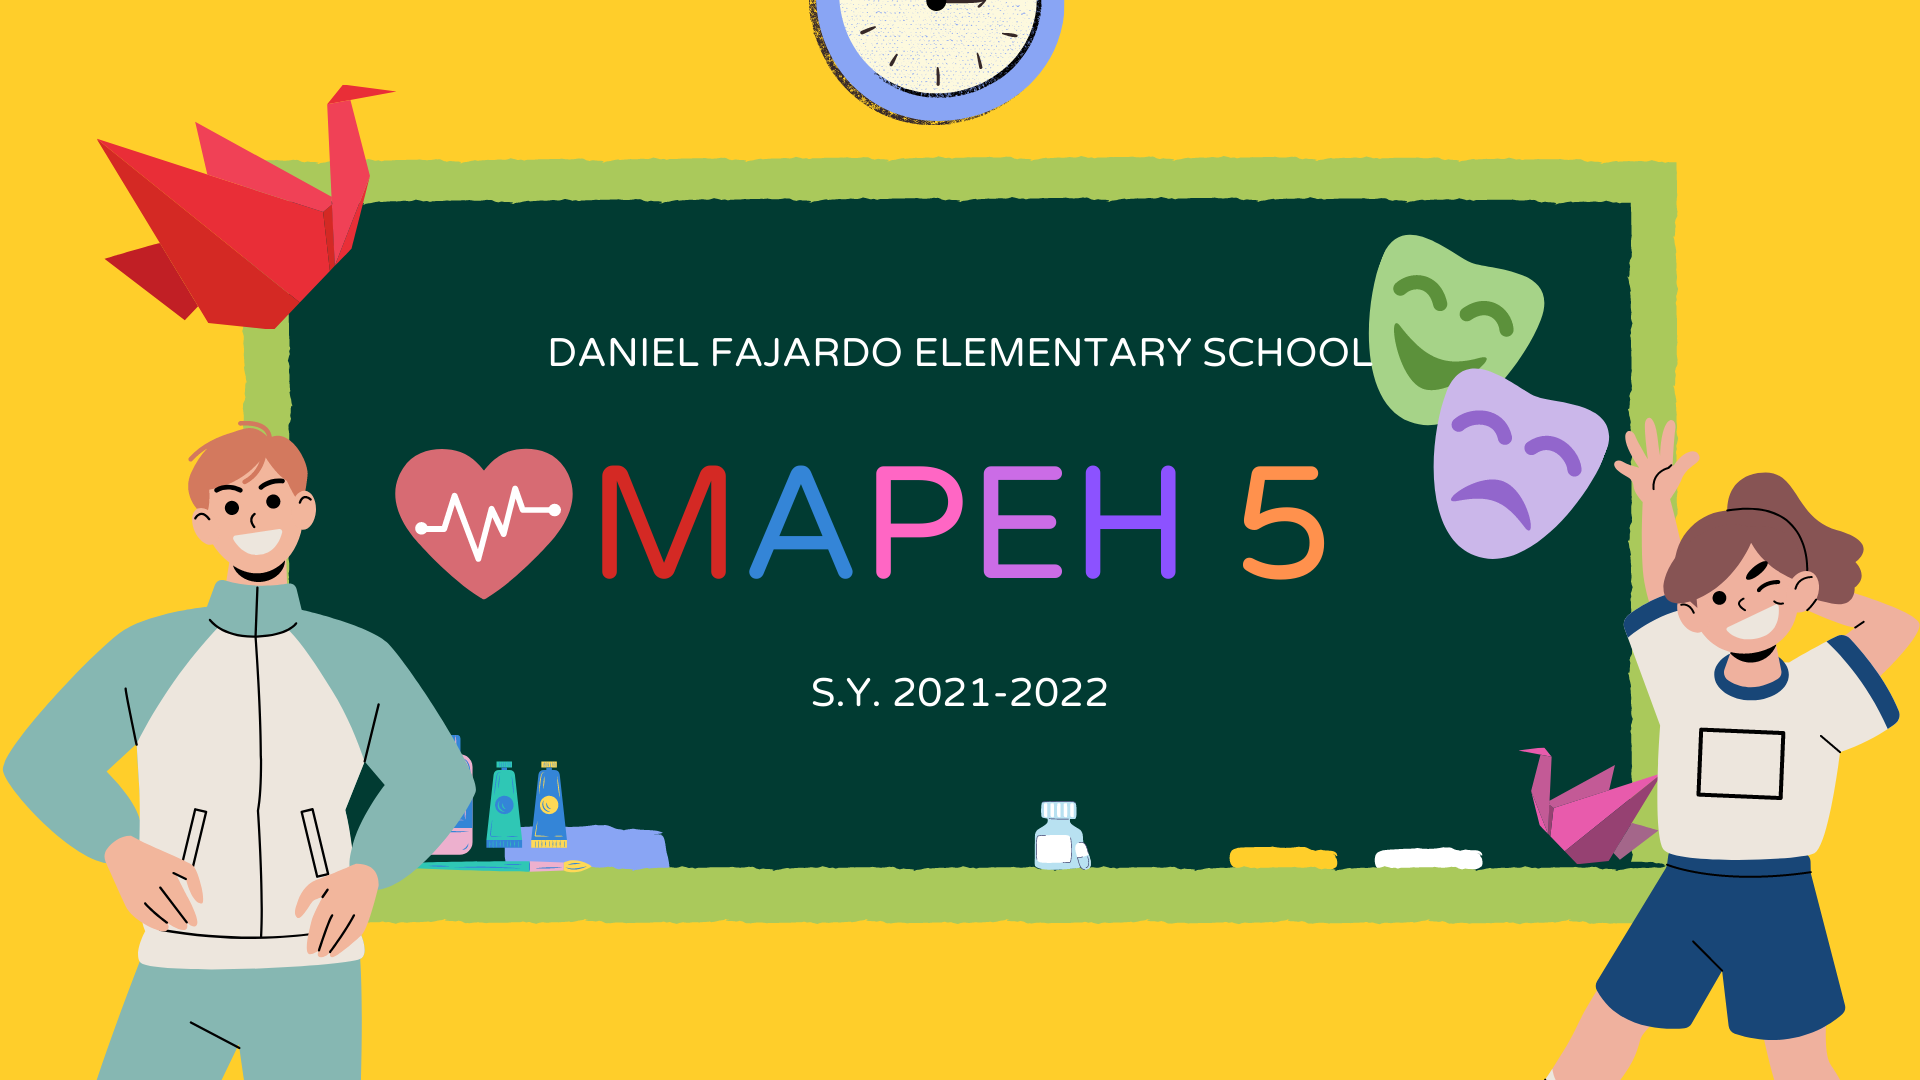  MAPEH 5 S.Y. 2021-2022